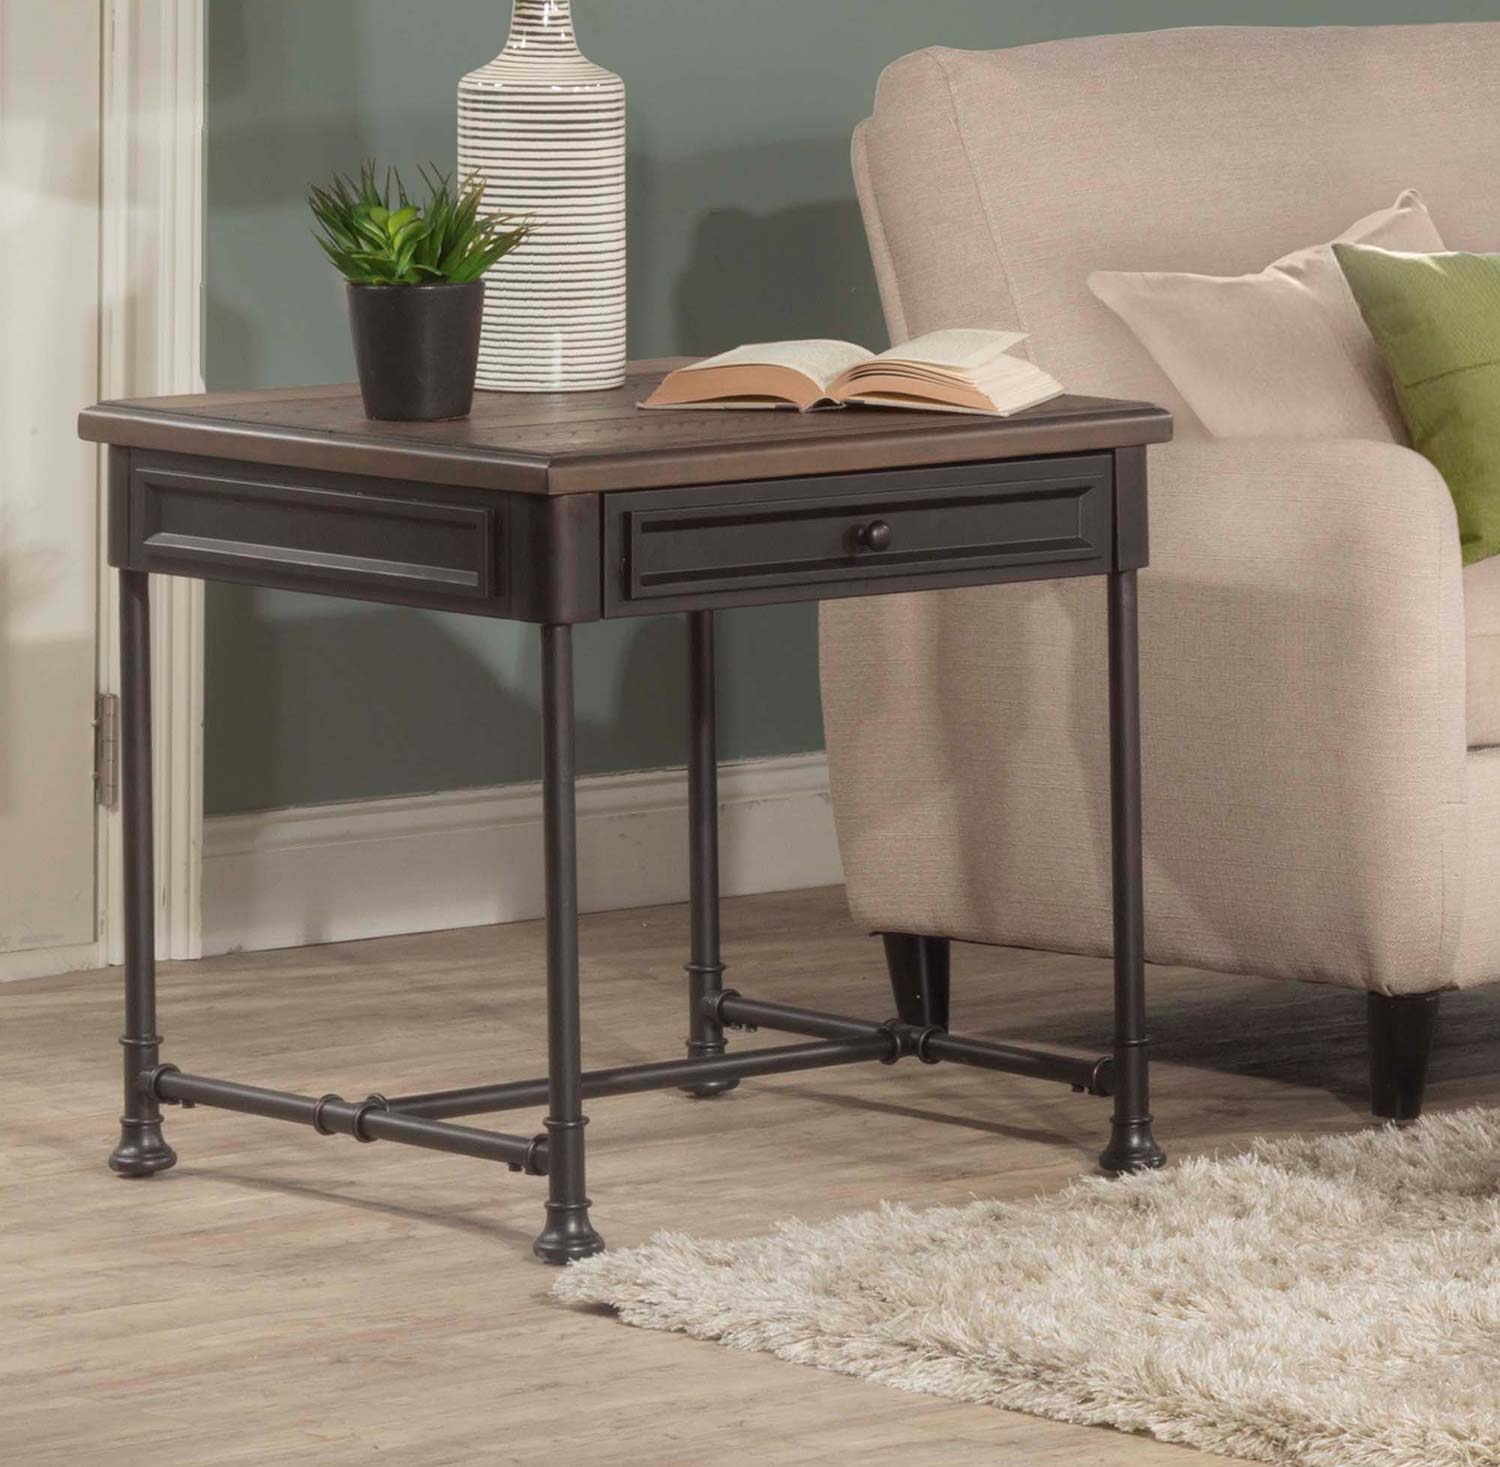 Hillsdale Casselberry End Table - Walnut/Brown